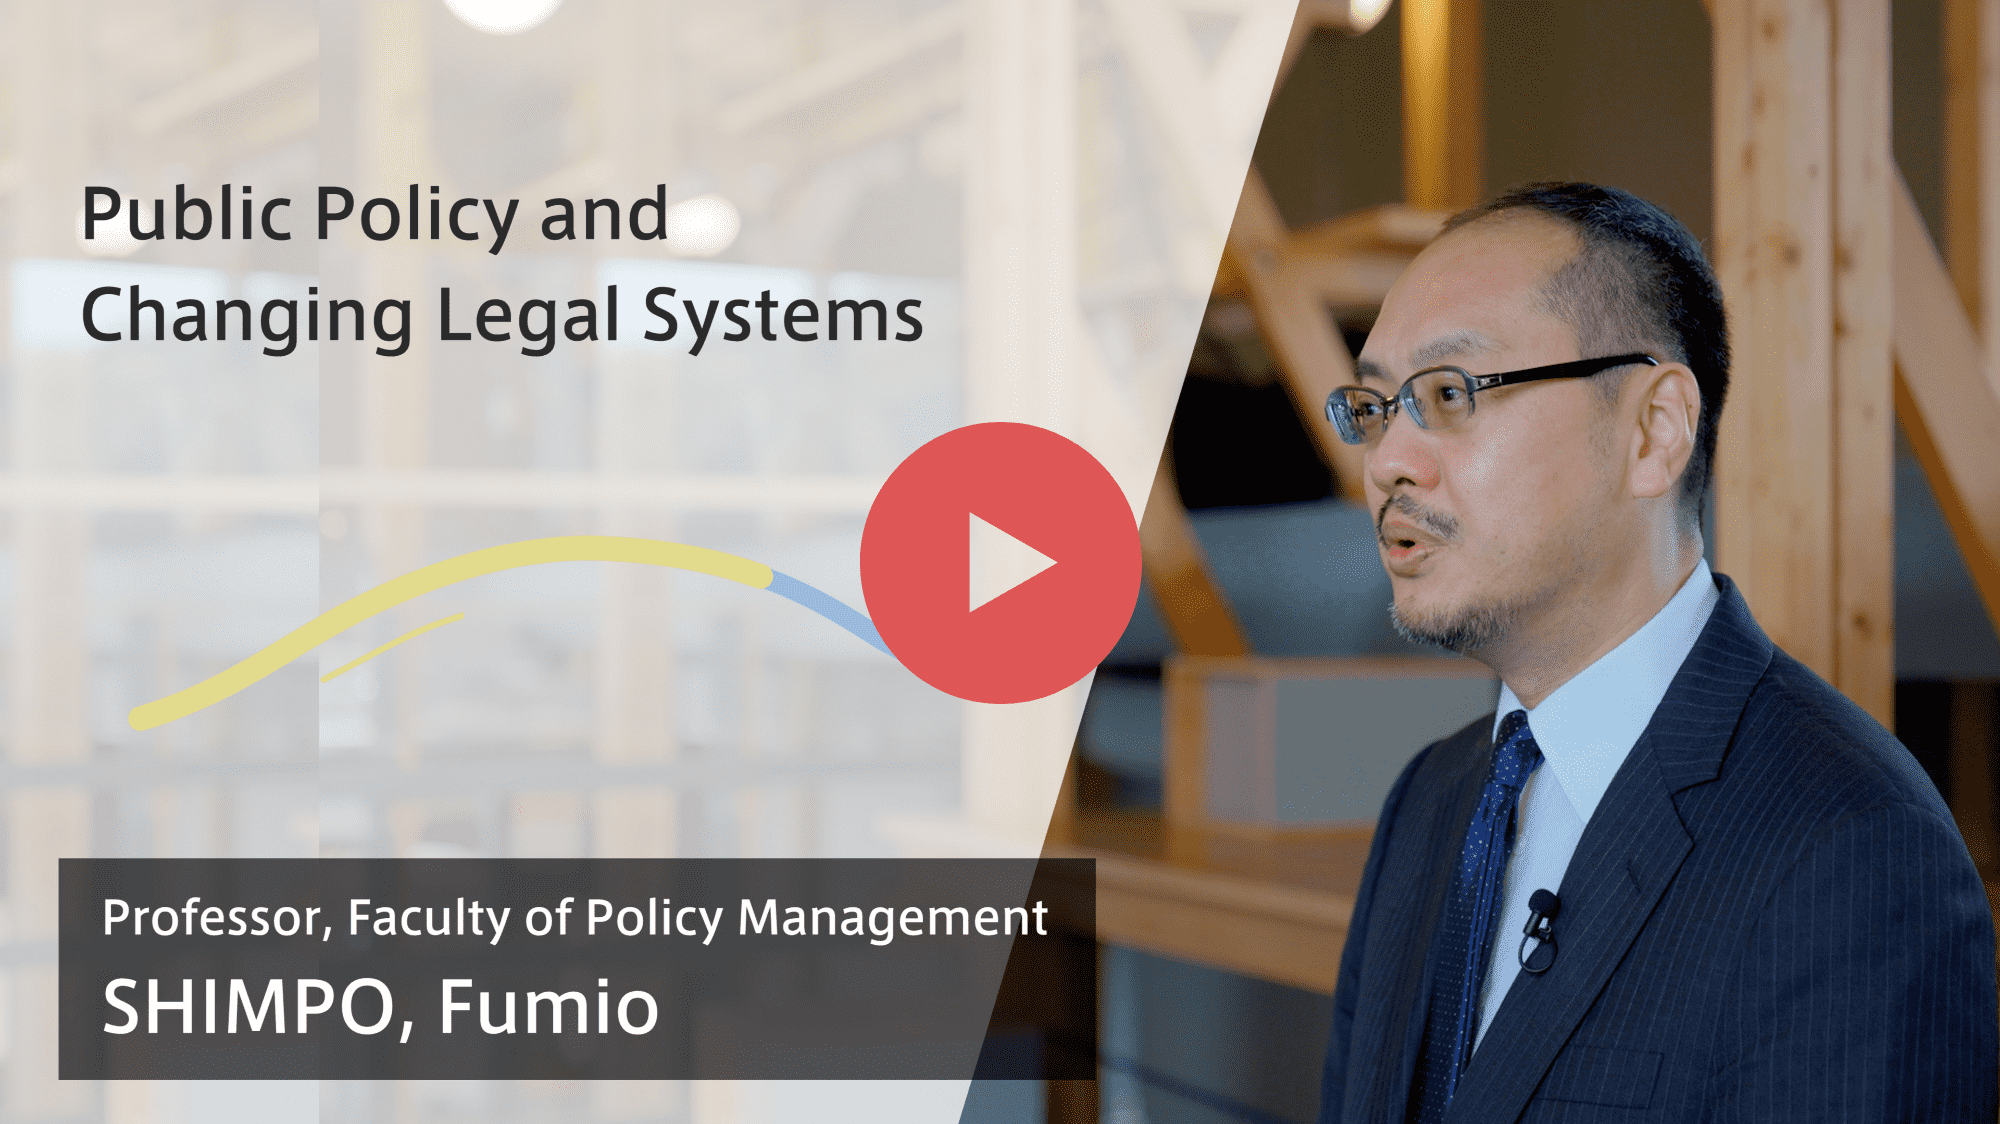 Public Policy and Changing Legal Systems